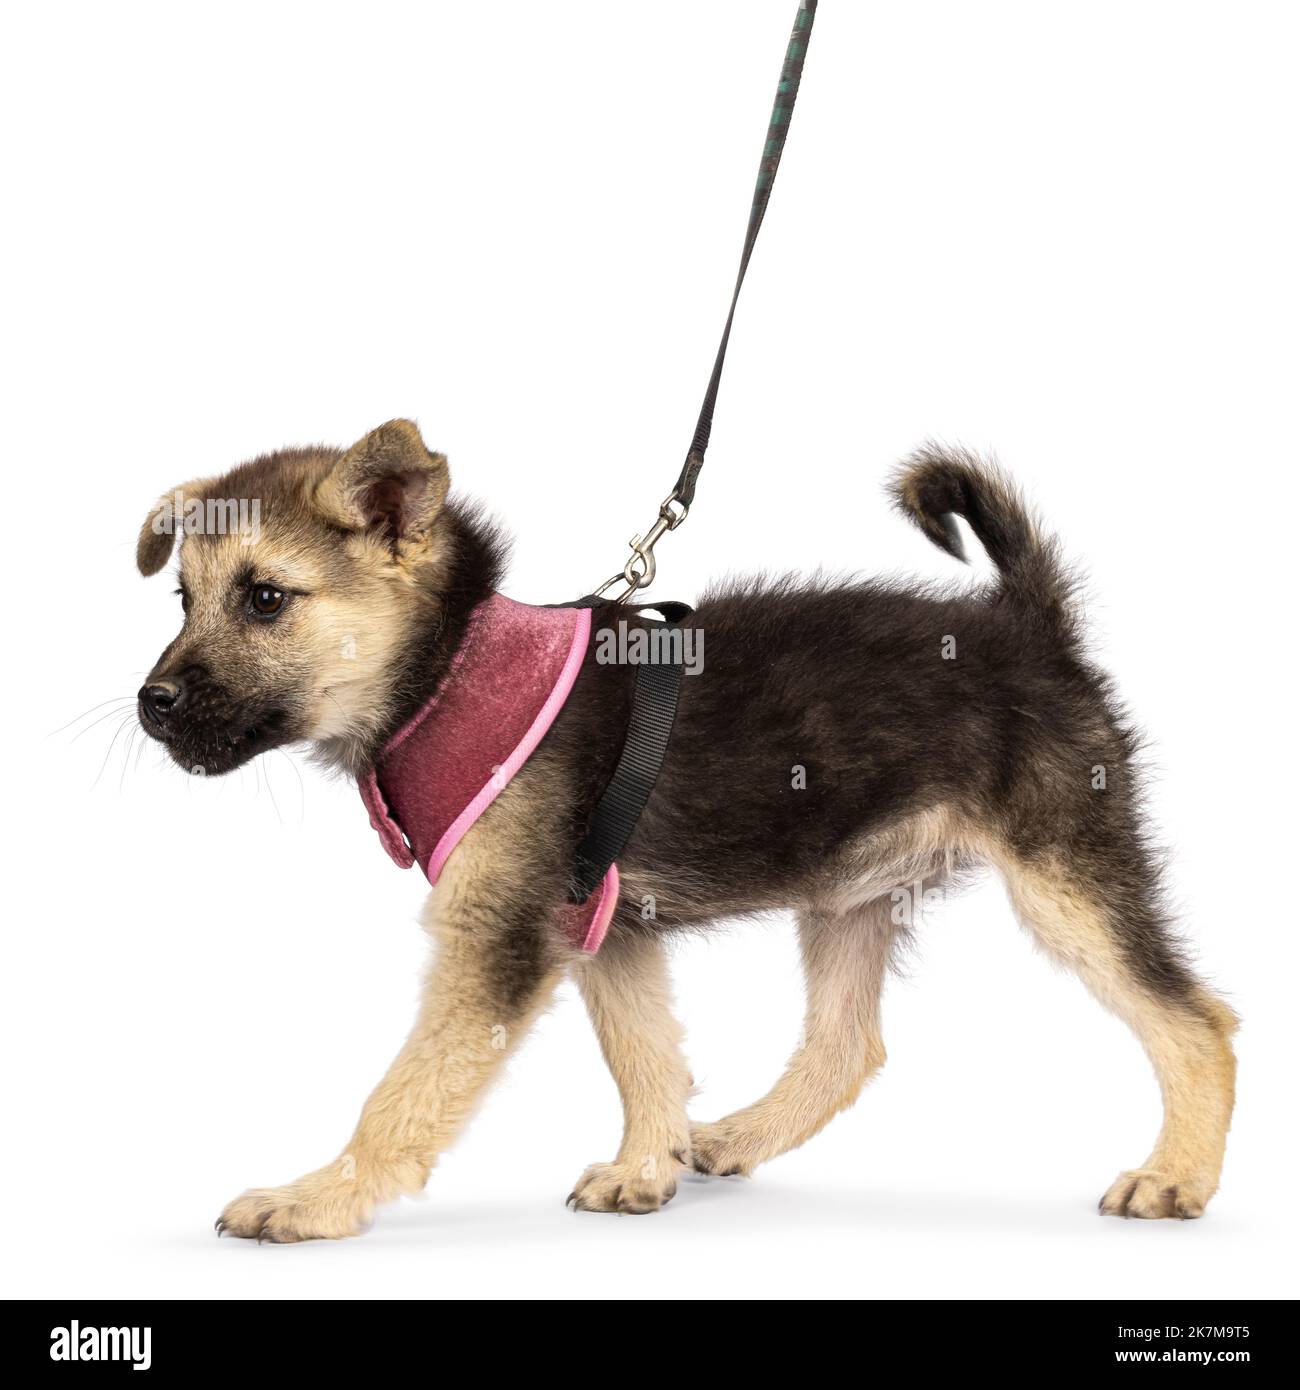 Adorable brown with black mixed Mudi and Germand Shepherd dog puppy, wearing harness. Walking side ways on a leash. Looking towards camera with one fl Stock Photo